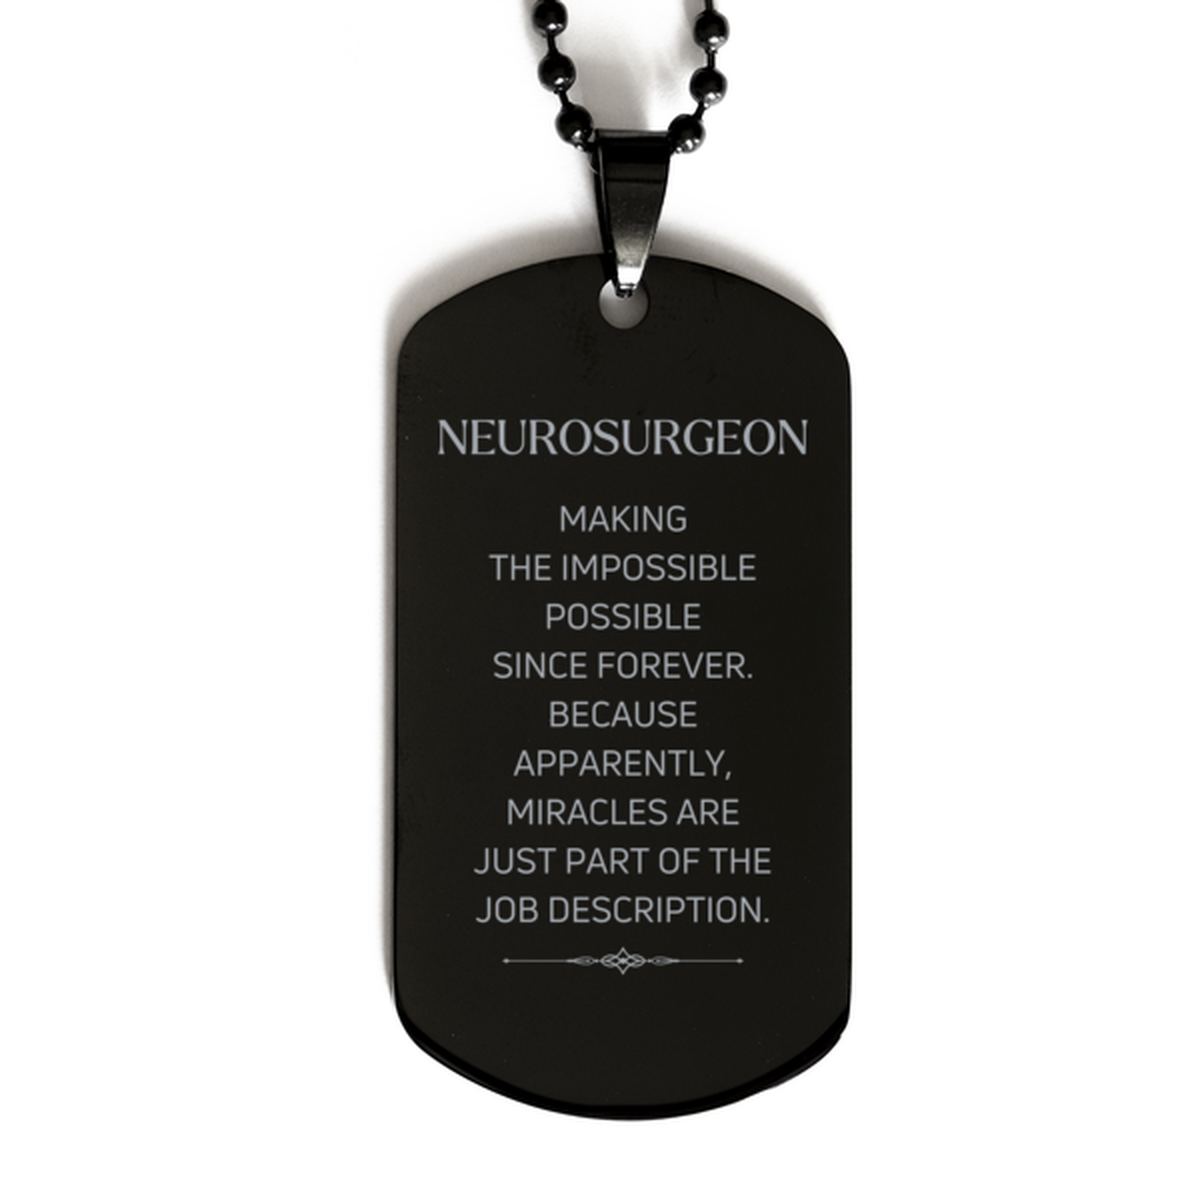 Funny Neurosurgeon Gifts, Miracles are just part of the job description, Inspirational Birthday Black Dog Tag For Neurosurgeon, Men, Women, Coworkers, Friends, Boss